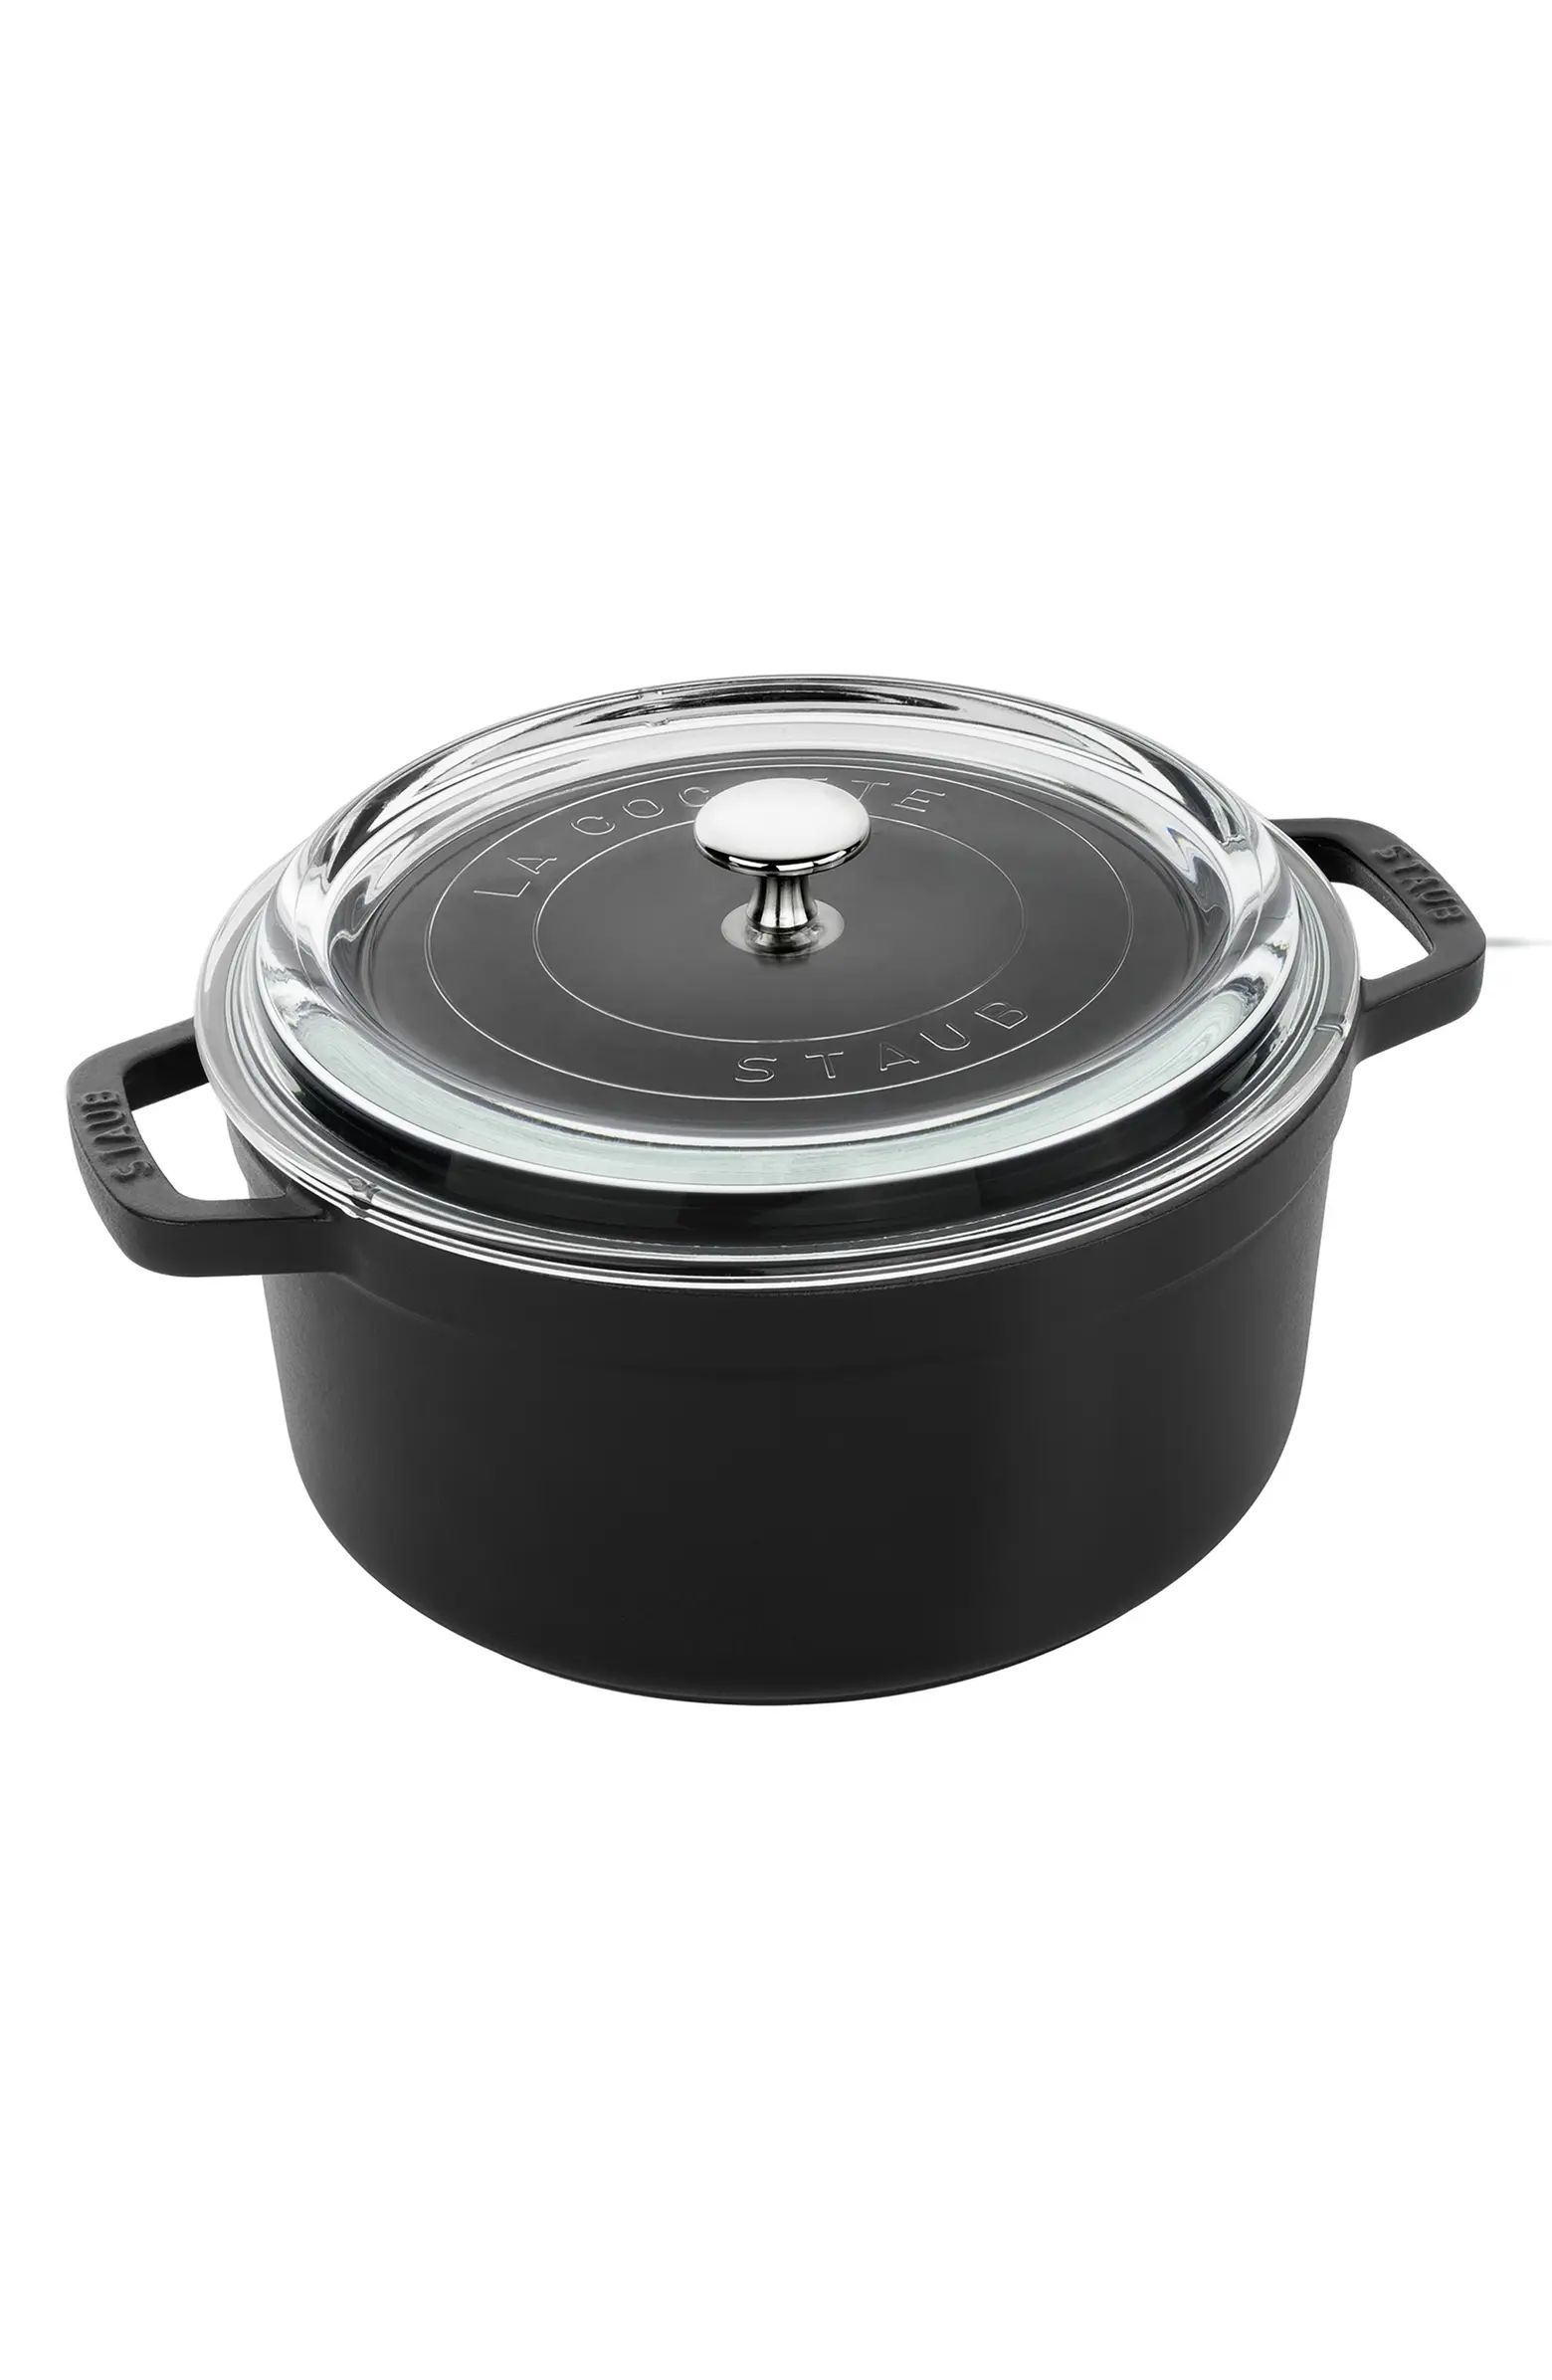 Cast Iron Cocotte with Glass Lid | Nordstrom